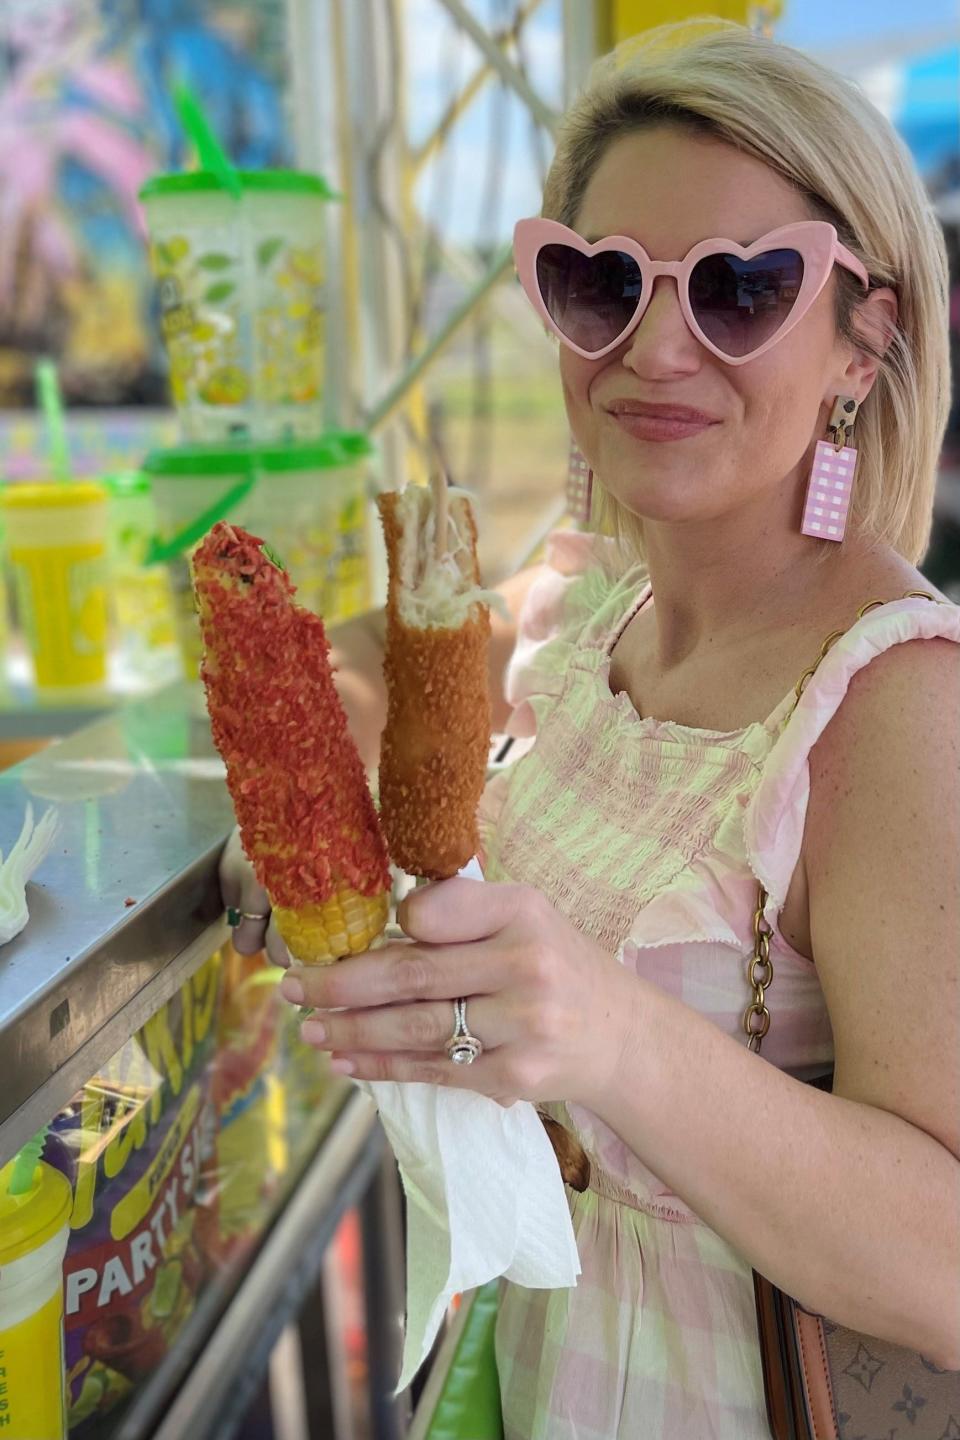 Korean Corn Dogs are one of the newest offerings debuting at the 81st North Florida Fair which opens on Thursday, Nov. 2, and concludes on Sunday, Nov. 12.